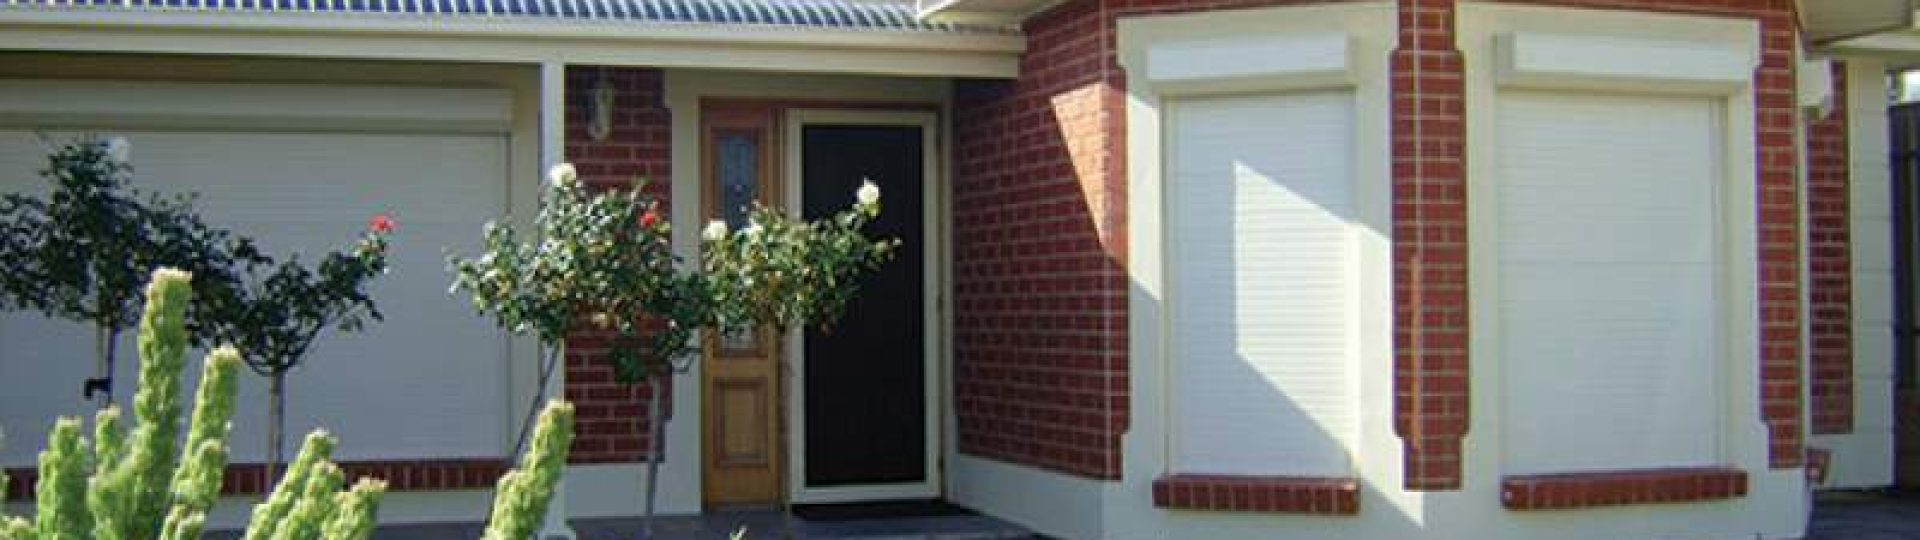 Cream Roller Shutters Closed on Brick Home